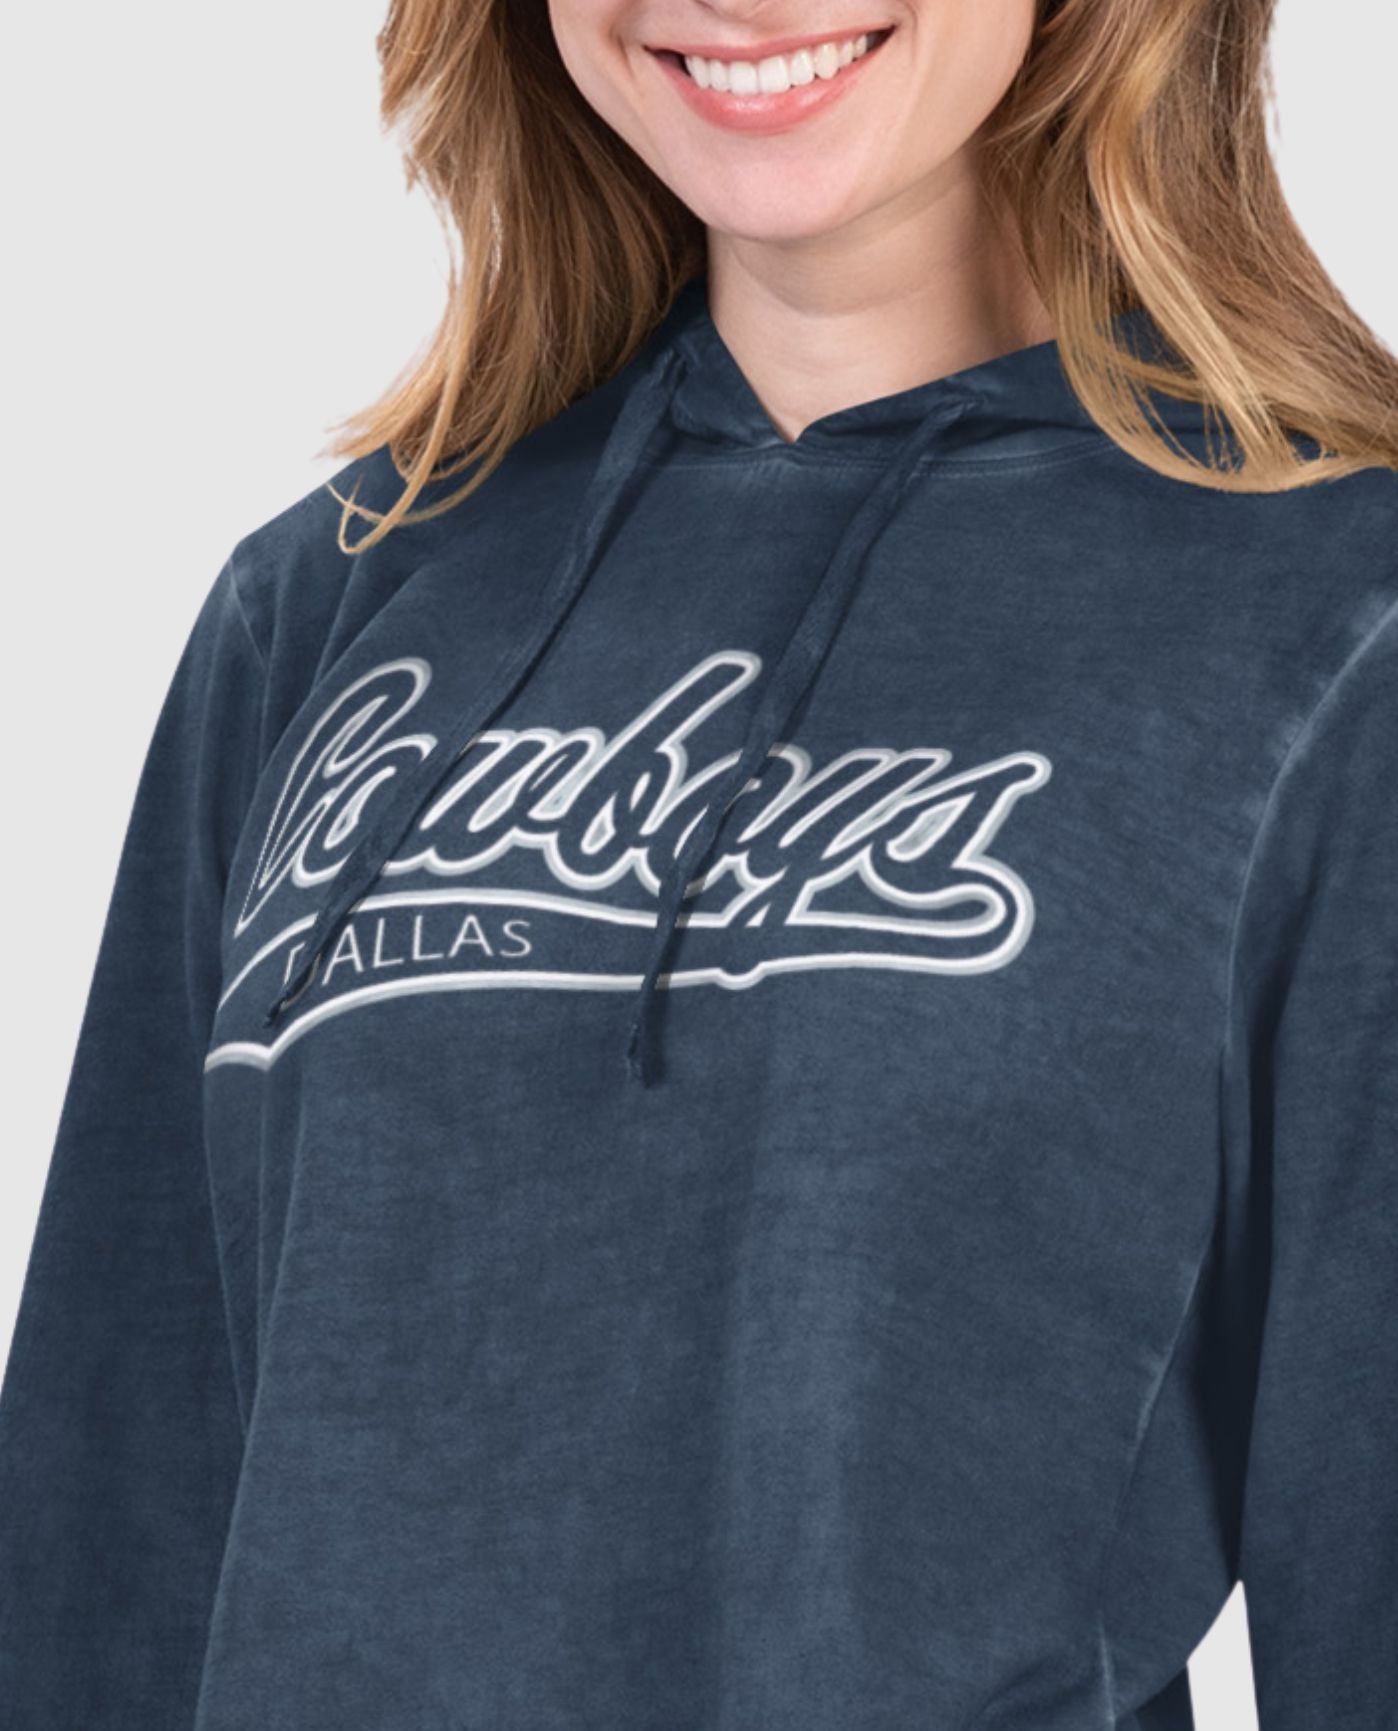 Front Logo on Chest of Women's Dallas Cowboys Wishbone Long Sleeve Hooded Shirt | Cowboys Navy